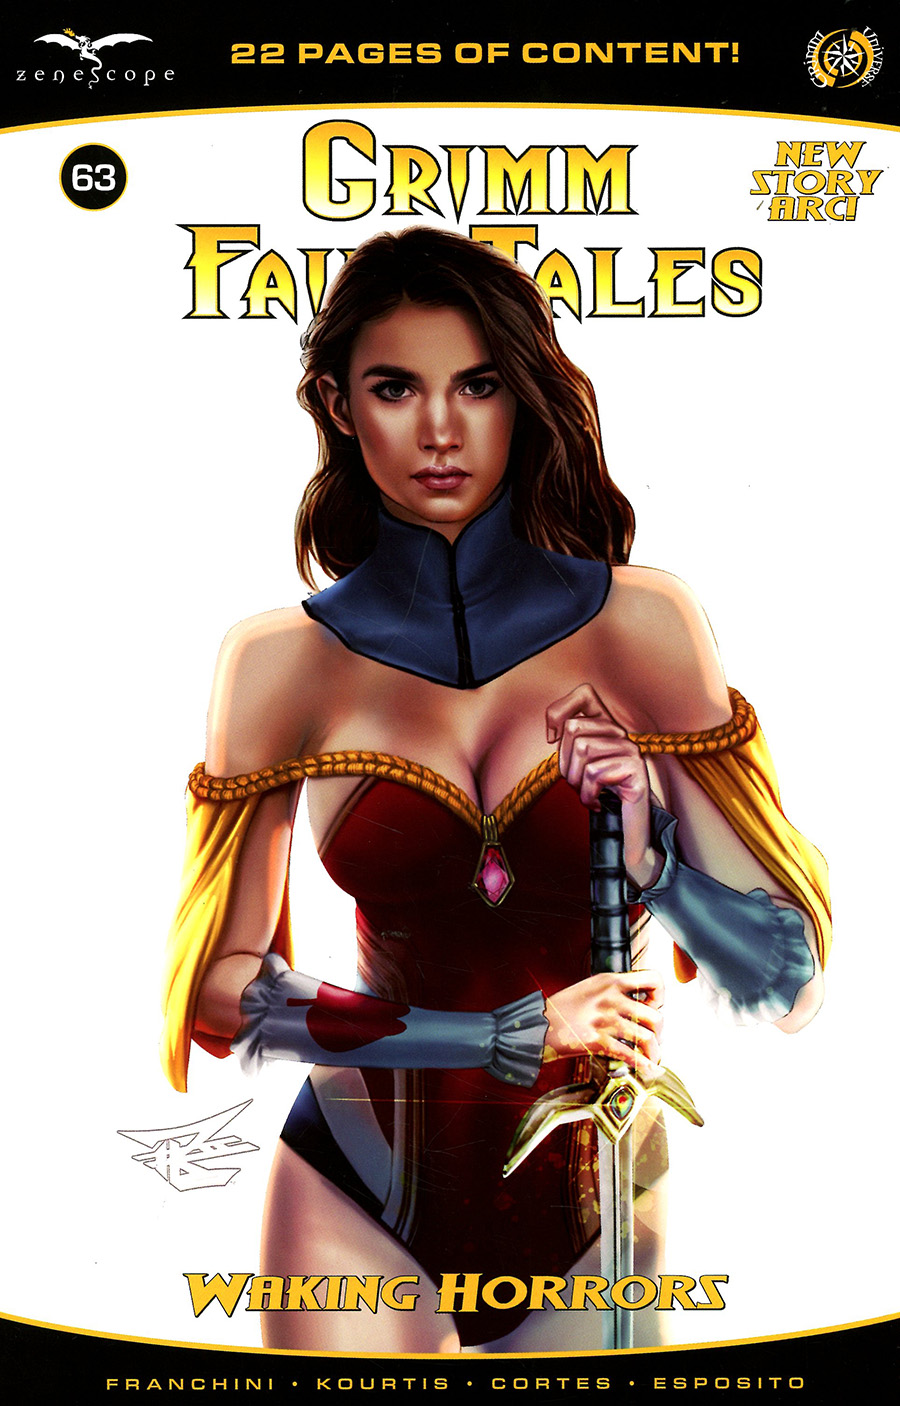 Grimm Fairy Tales Vol 2 #63 Cover C Ron Leary Jr